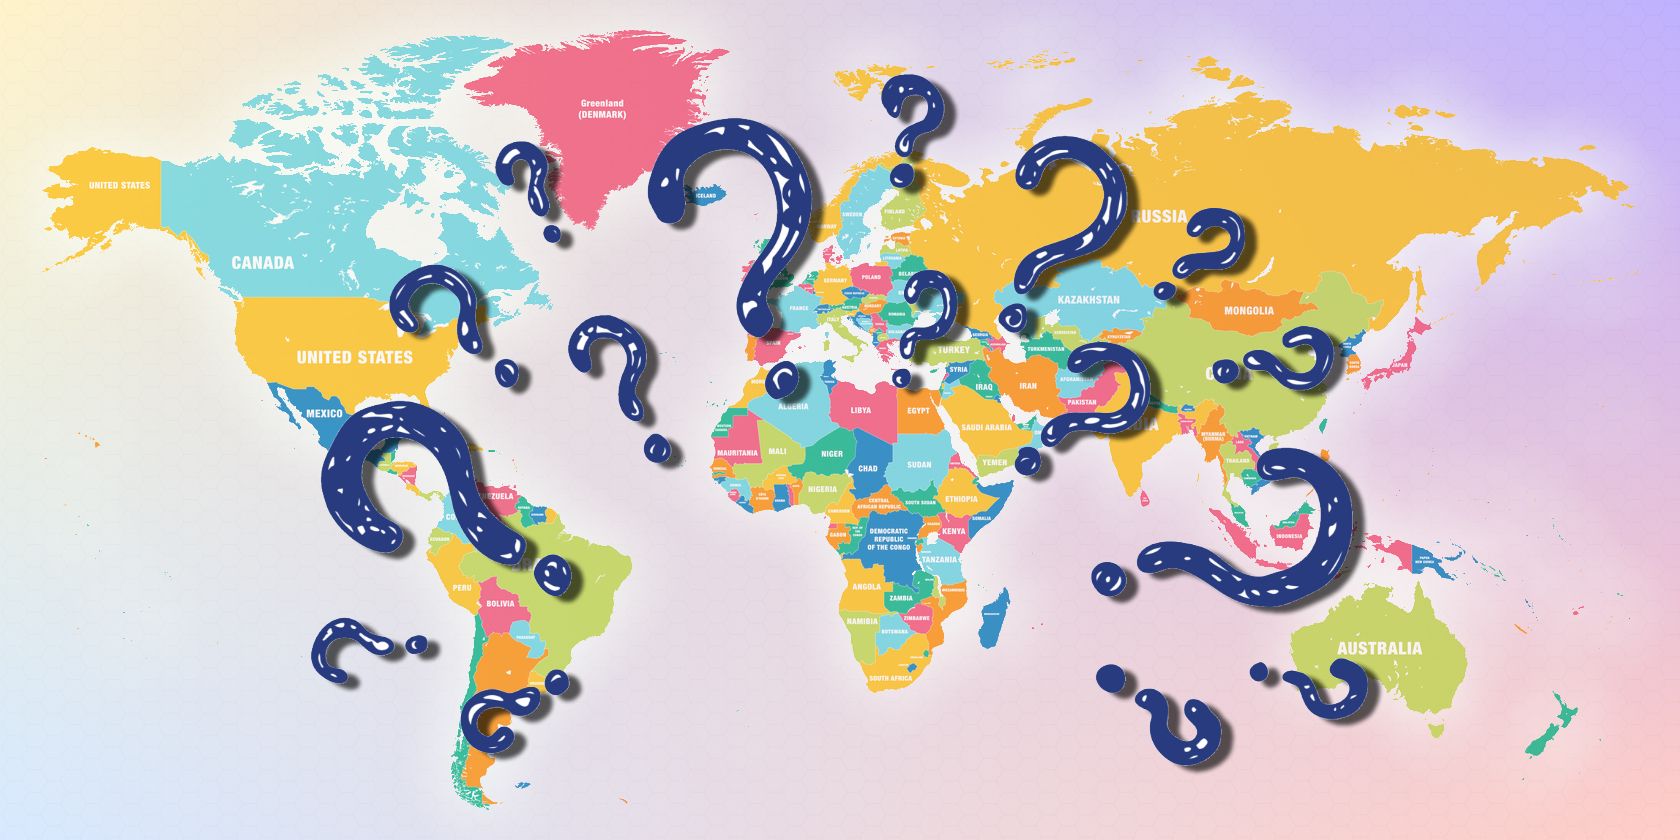 worldle wordle clone world map question mark feature